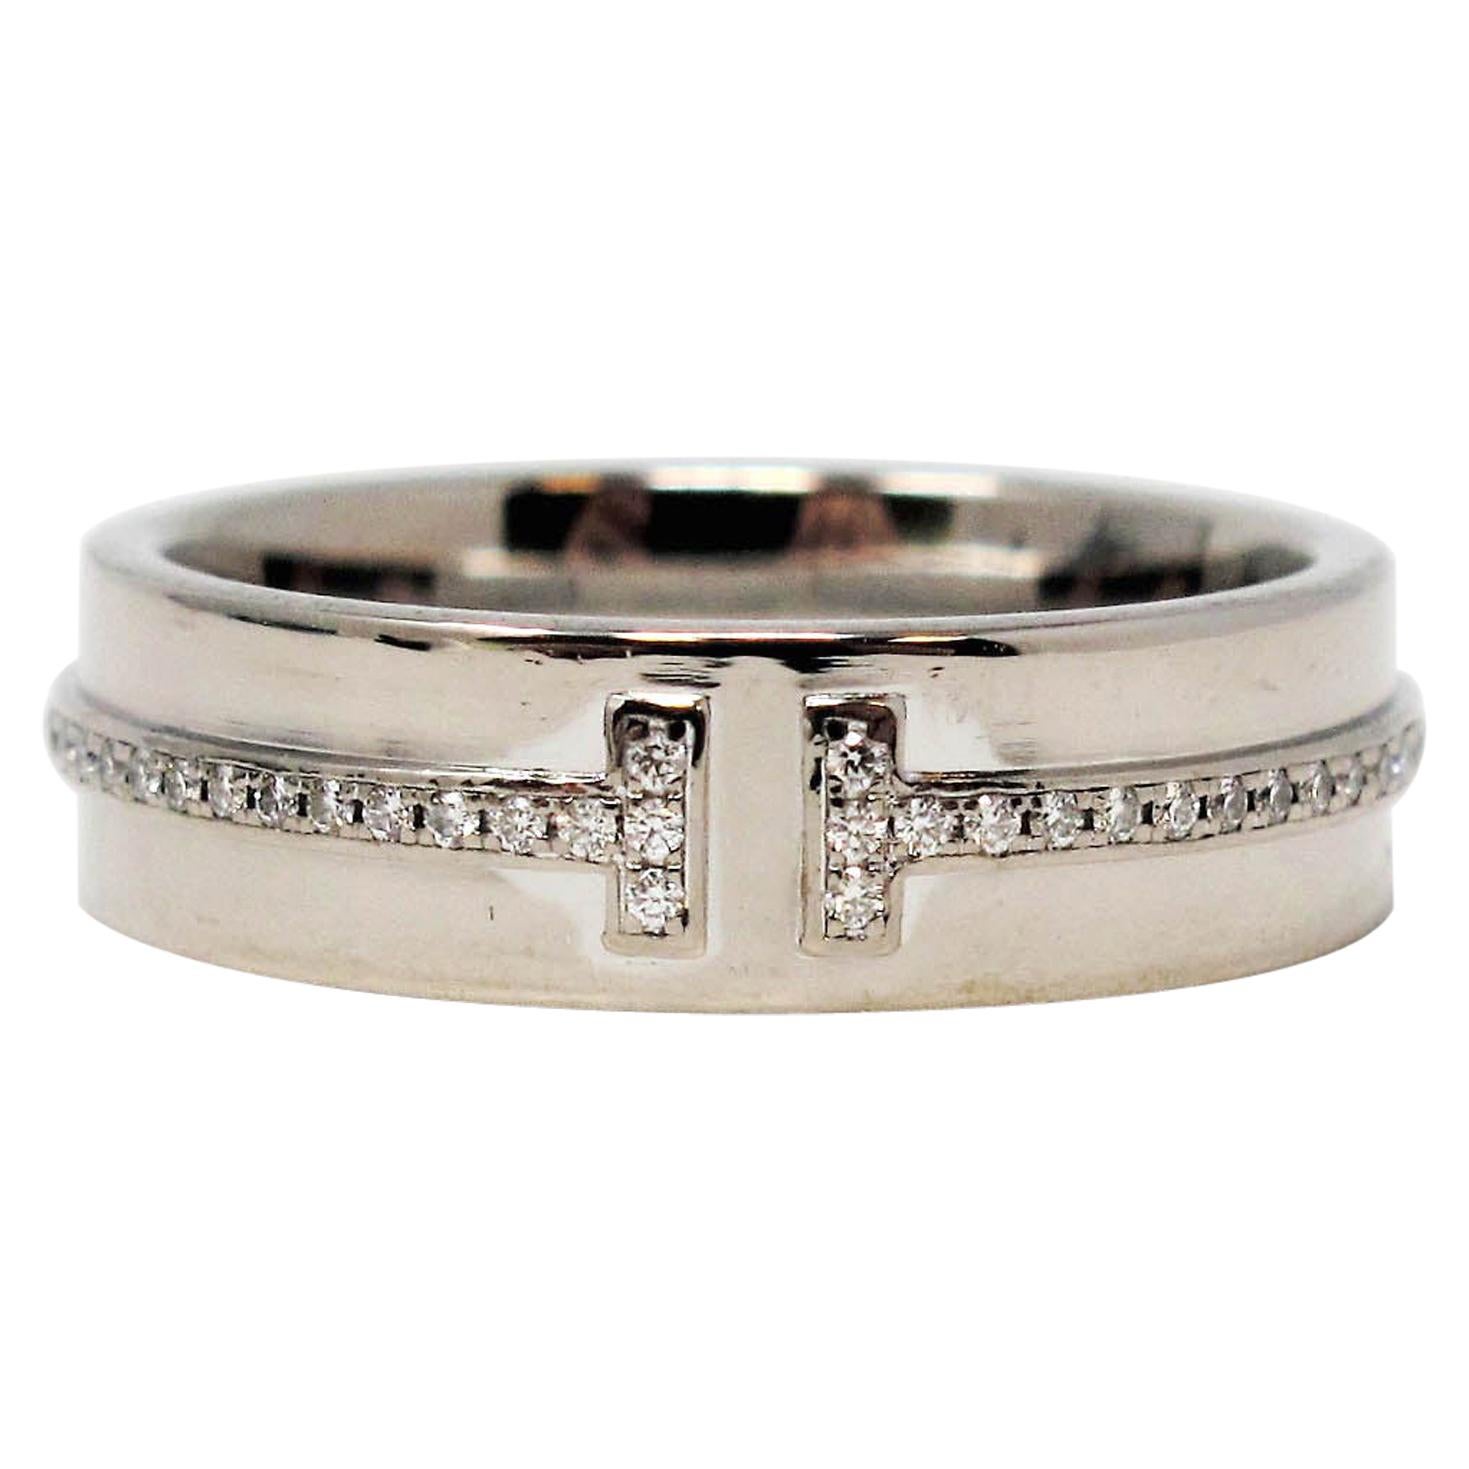 Tiffany & Co. Pave Diamond Tiffany T Band Ring in 18 Karat White Gold For Sale